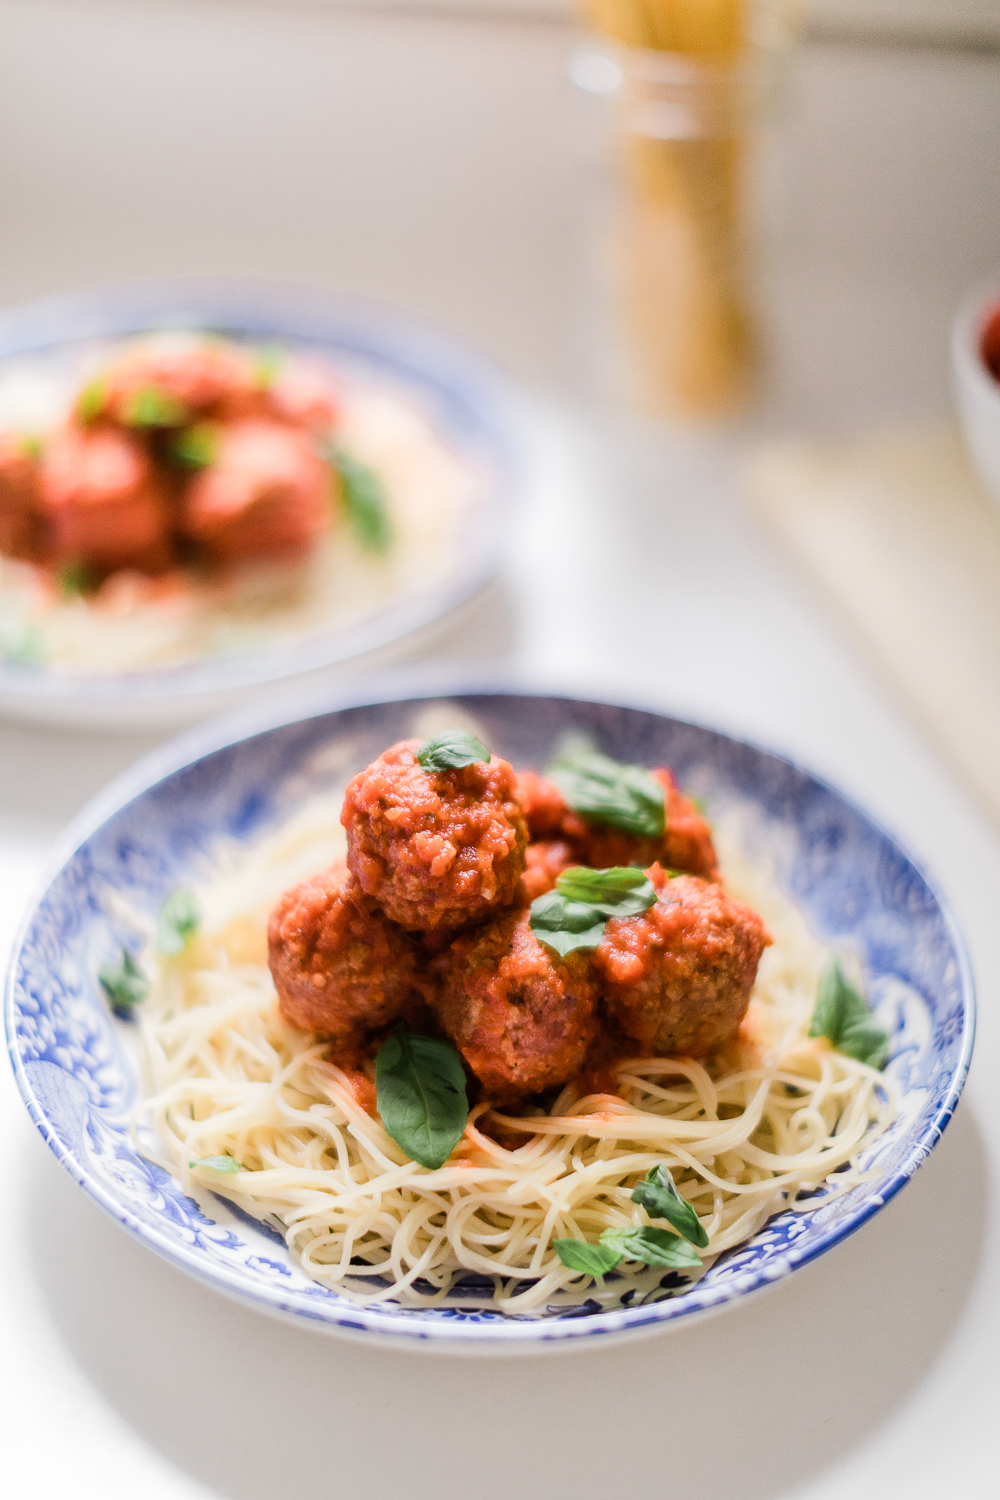 Spaghetti and Pure Farmland Plant-Based Meatballs Recipe by affordable entertaining blogger Stephanie Ziajka from Diary of a Debutante, blue and white Italian tablescape